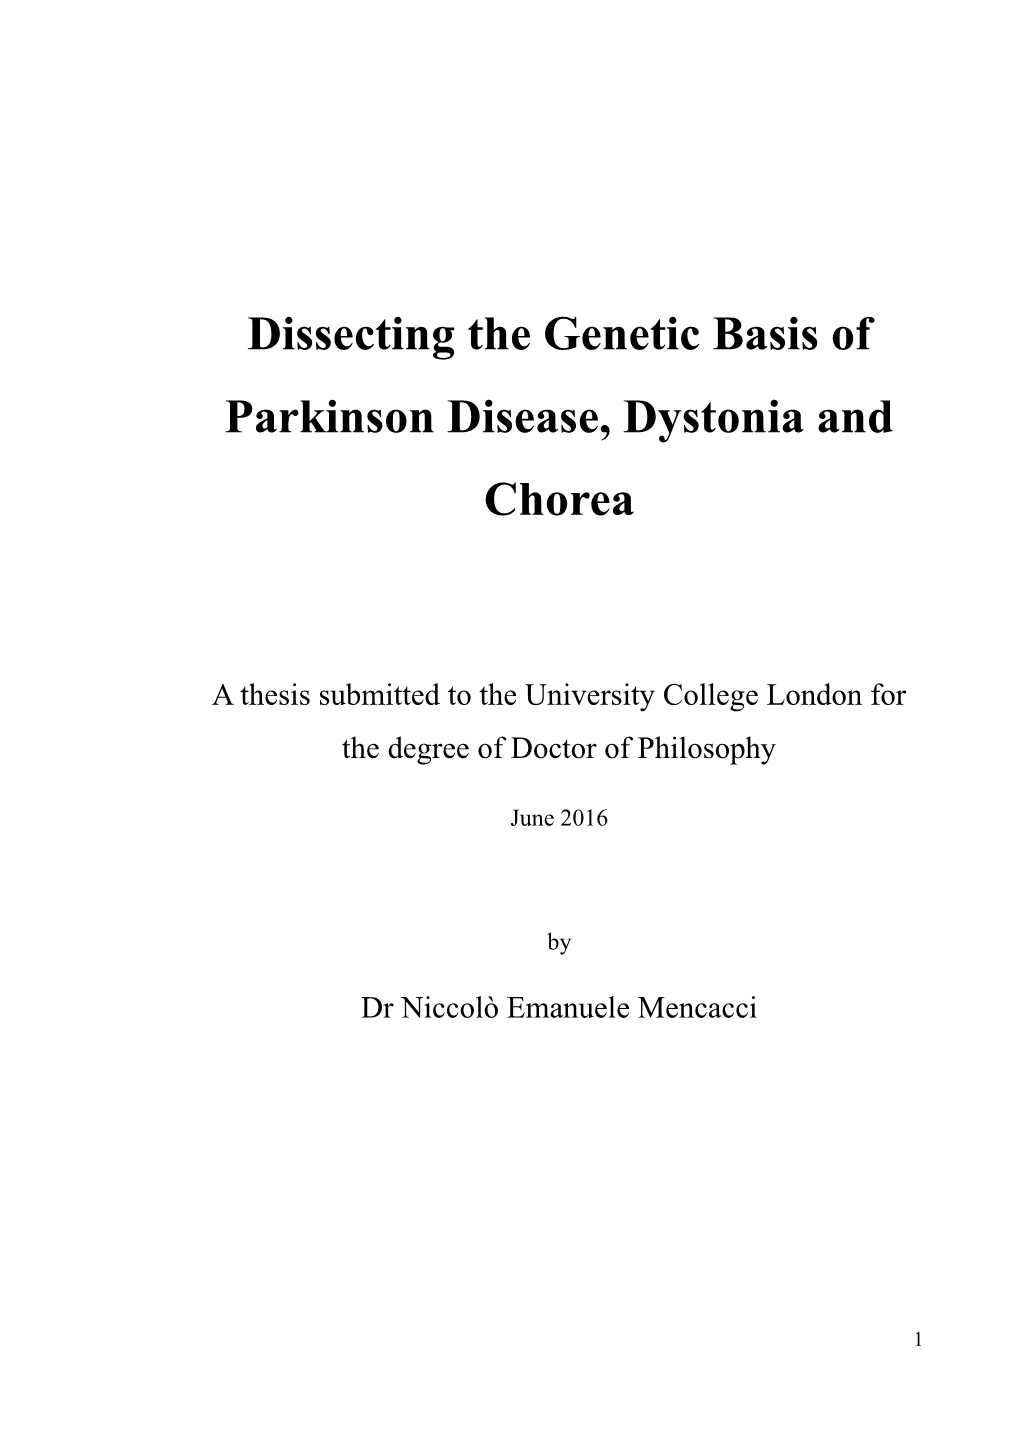 Dissecting the Genetic Basis of Parkinson Disease, Dystonia and Chorea